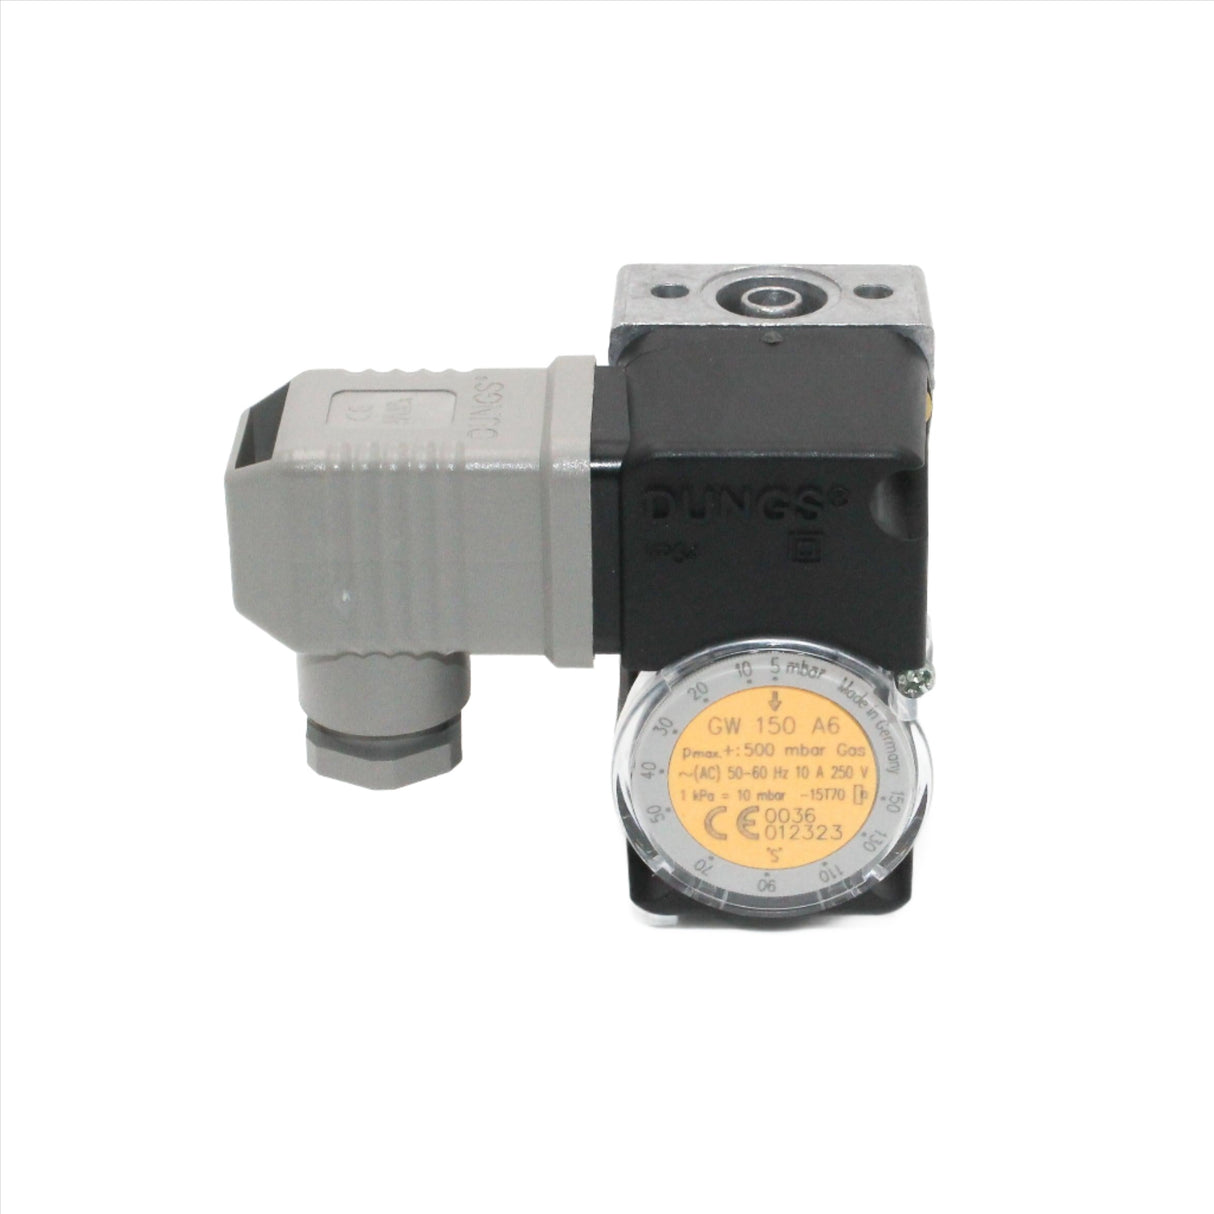 Dungs GW3 A6 1-3 mbar Compact Pressure Switch